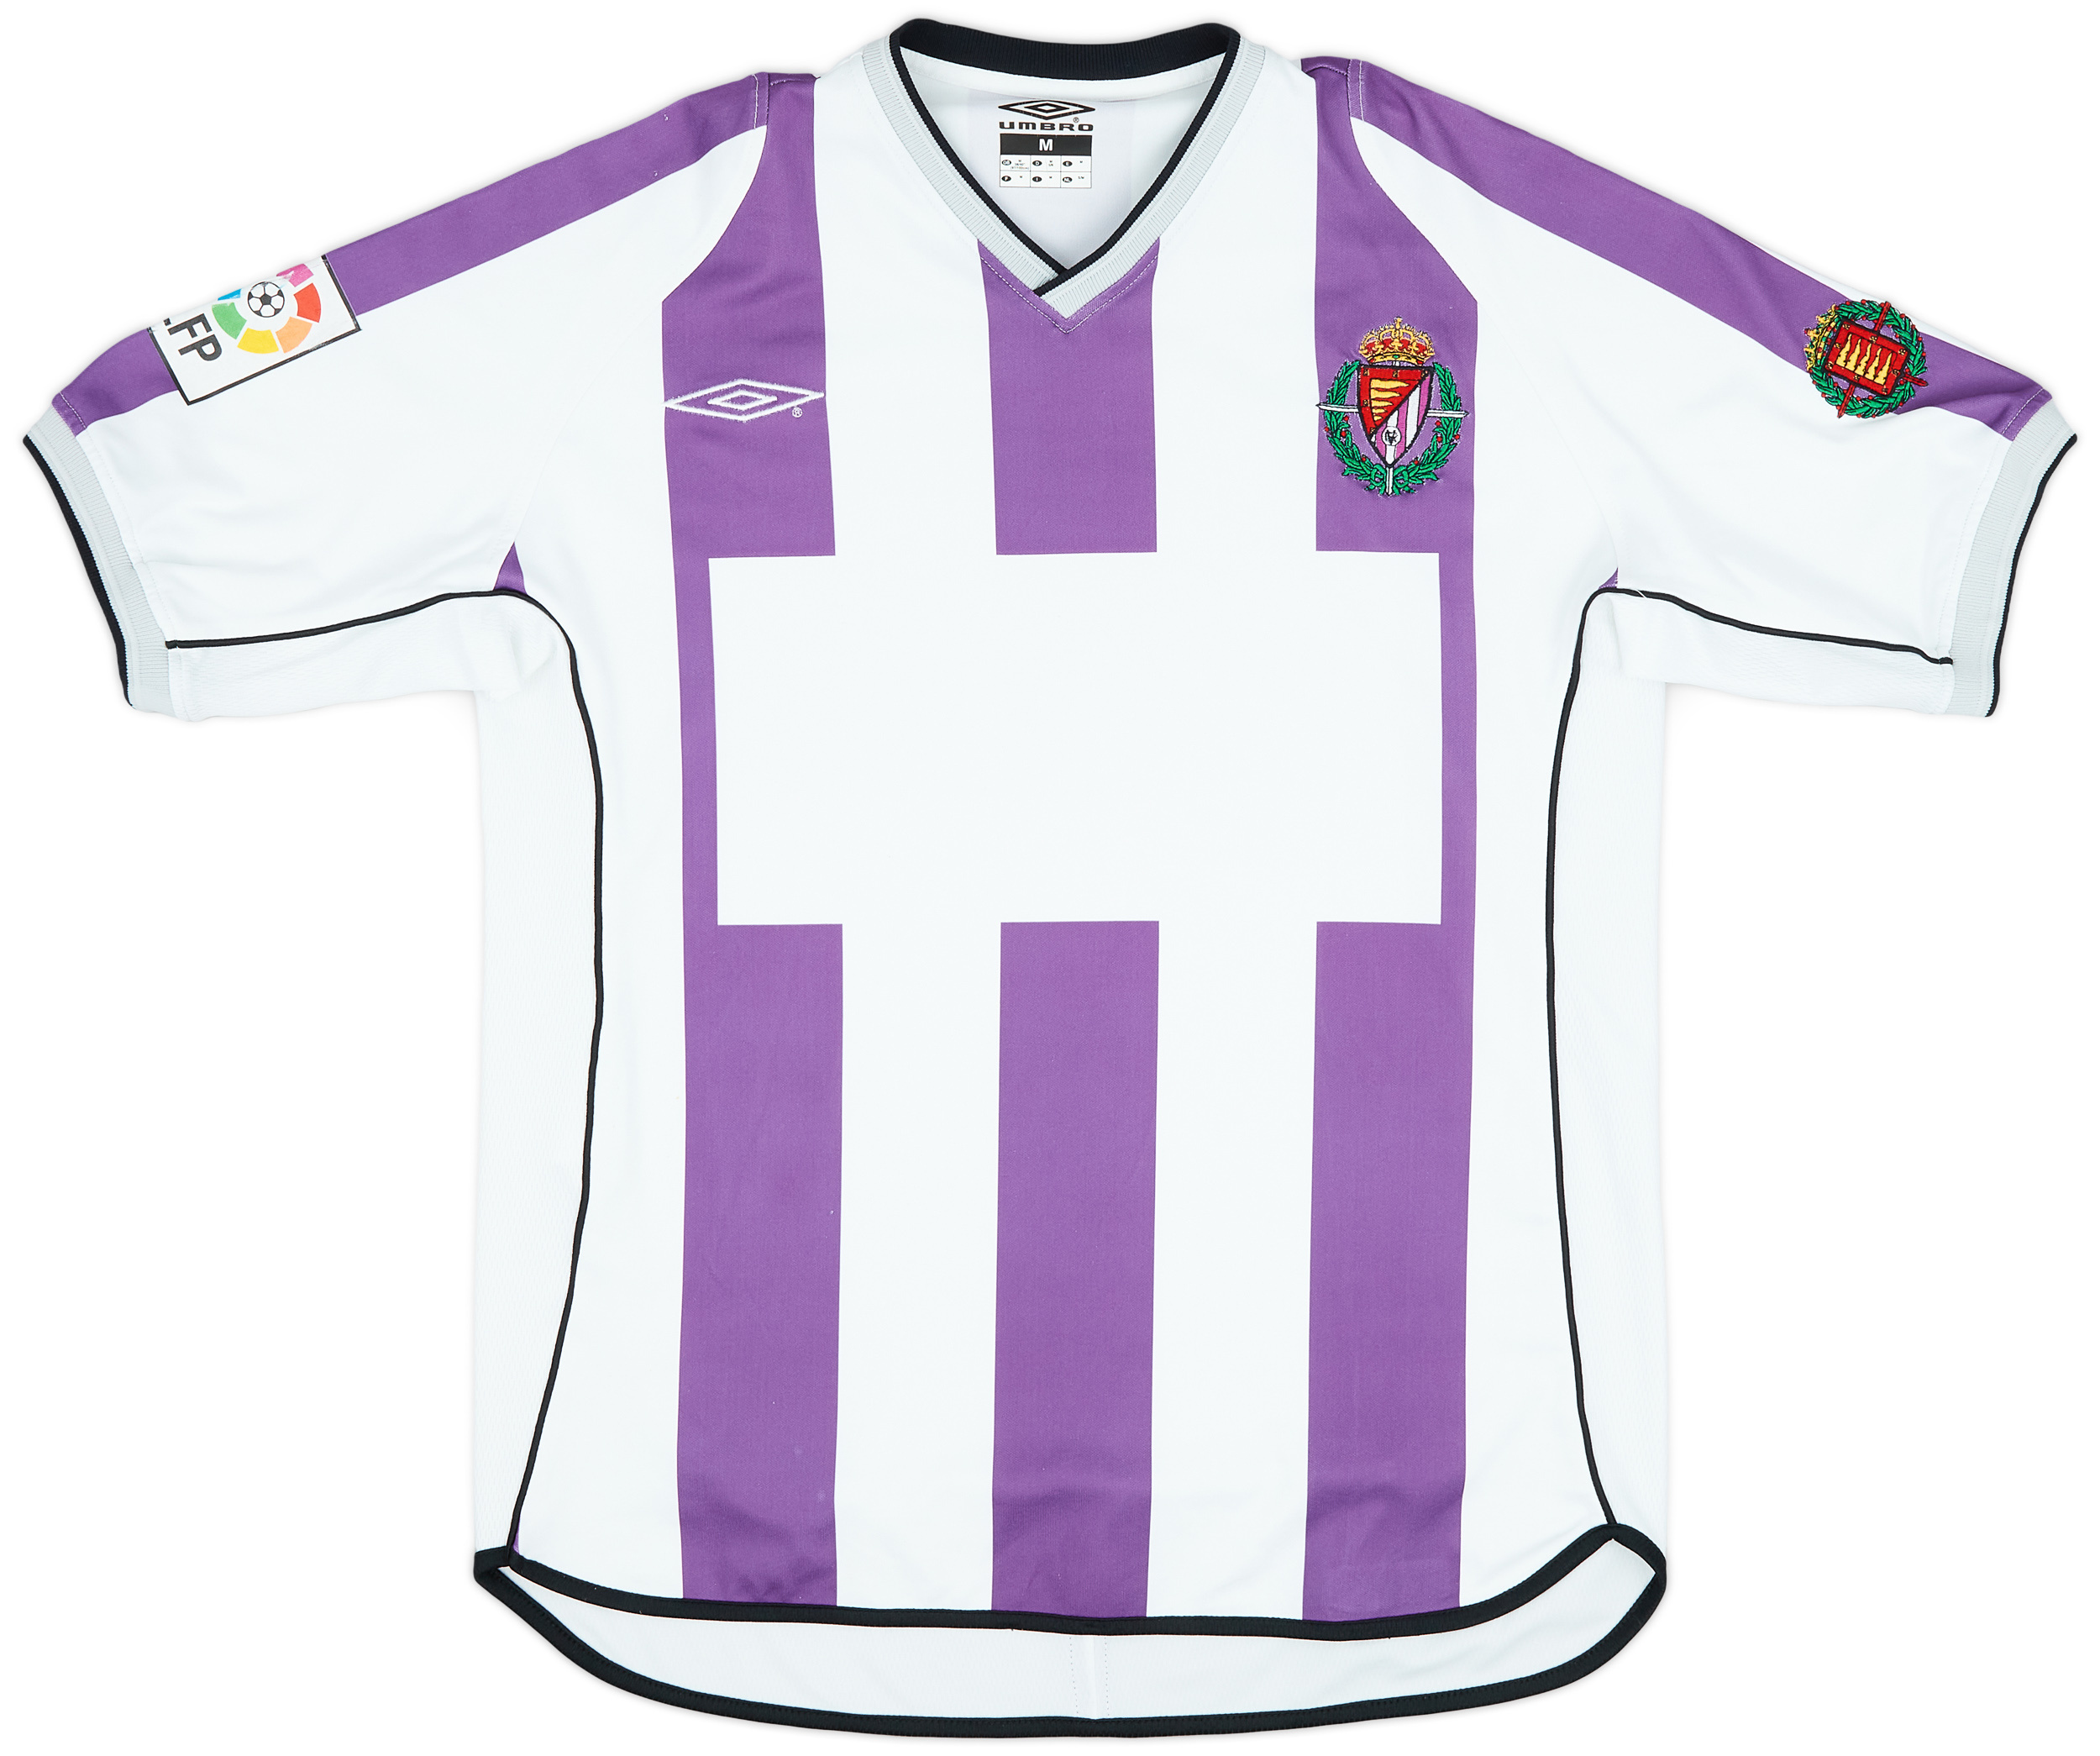 2001-03 Real Valladolid Home Shirt - 8/10 - ()